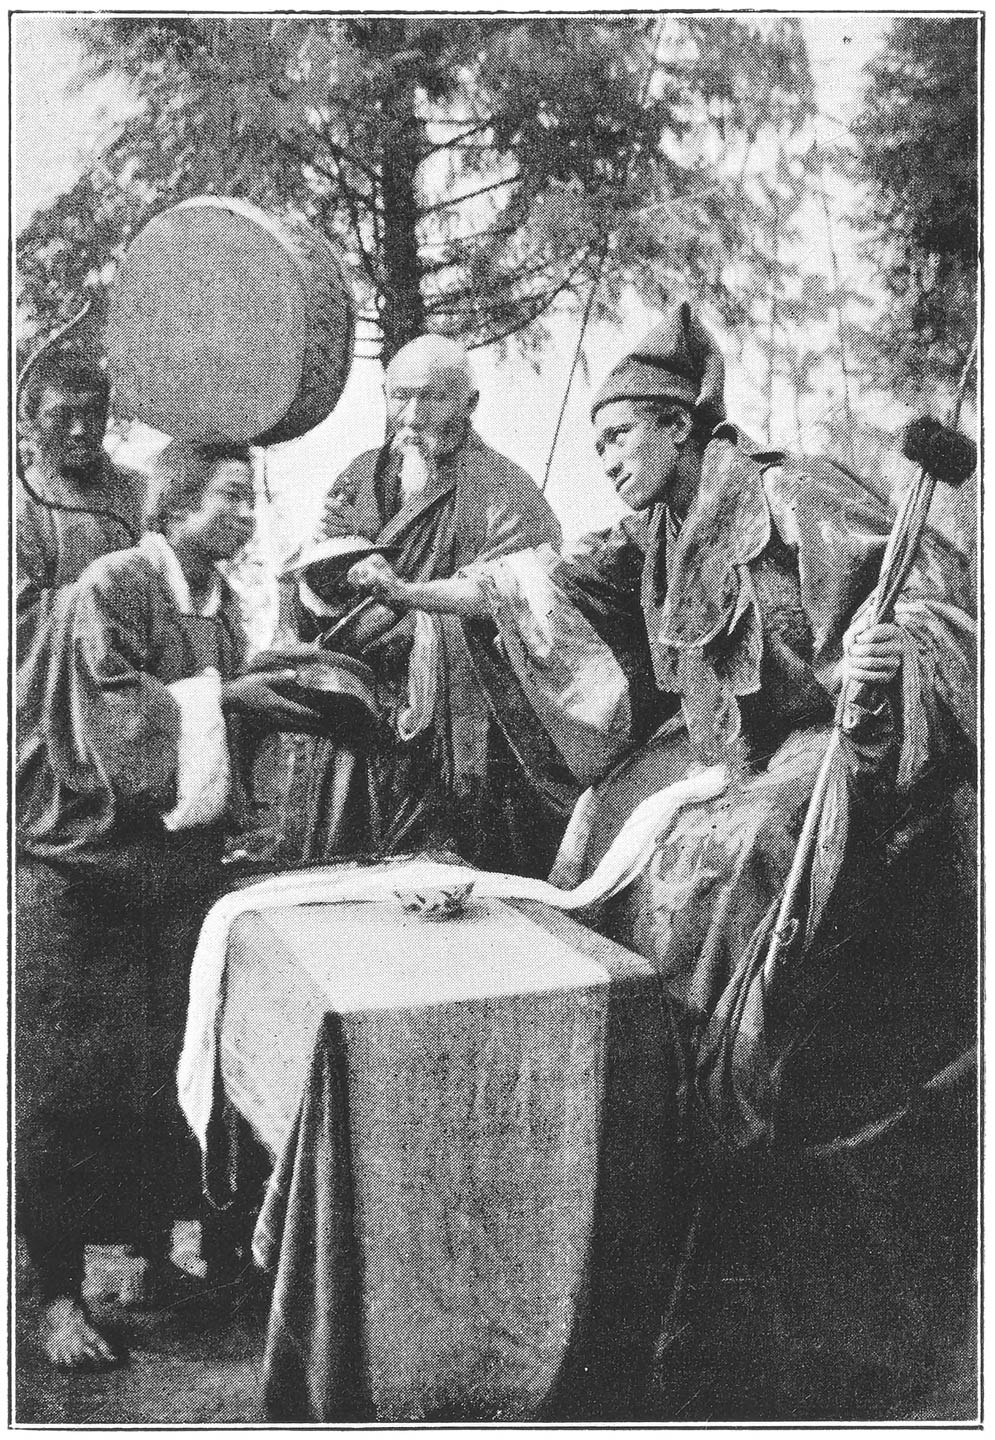 LAMA DELIVERING AN ORACLE.